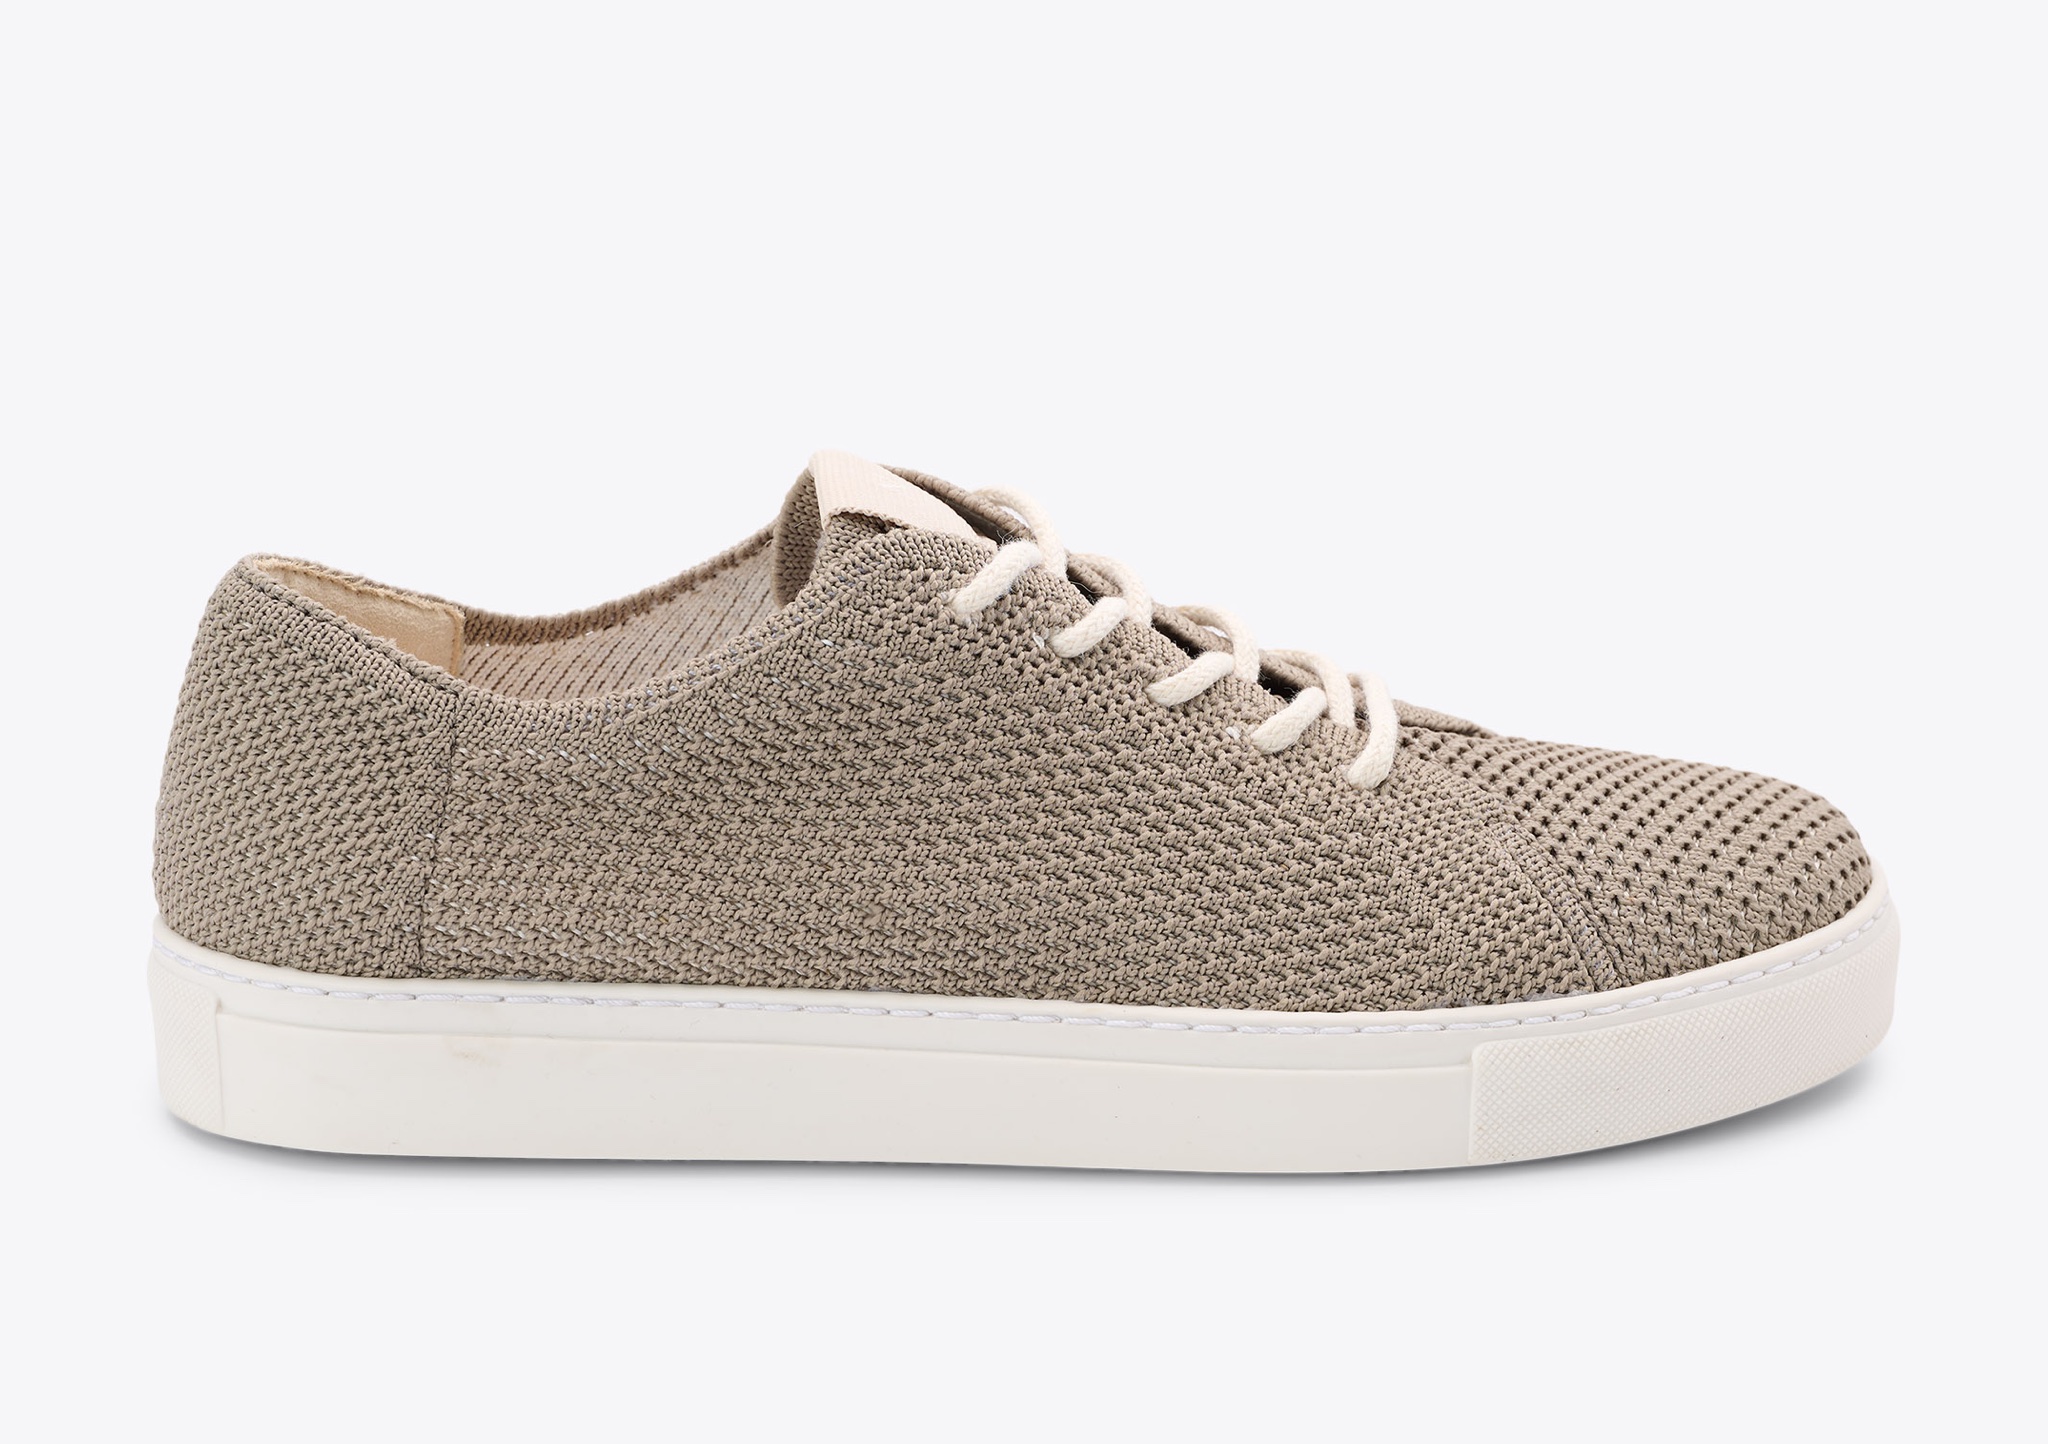 Nisolo Women's Go-To Eco-Knit Sneaker Grey - Every Nisolo product is built on the foundation of comfort, function, and design. 